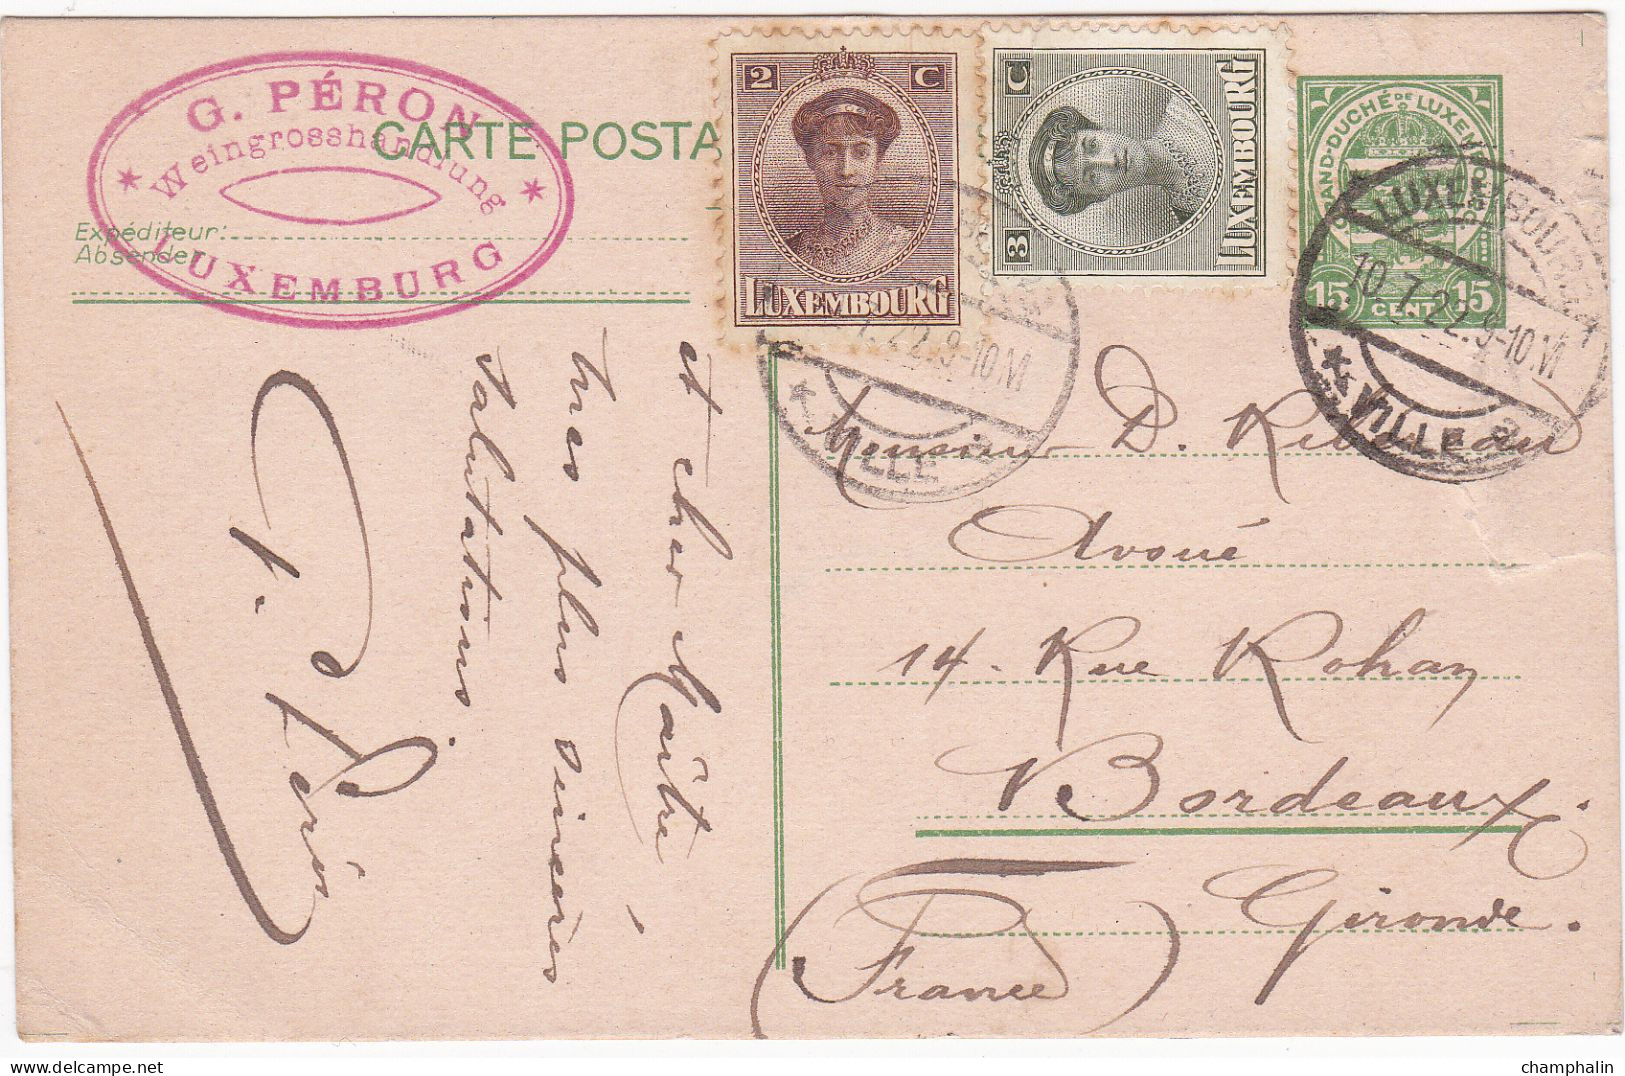 Luxembourg - Entier Postal De Luxembourg Pour Bordeaux (33) - 8 Juillet 1922 - Timbres 15c + YT 119 & 120 - 2 CAD Ronds - Stamped Stationery